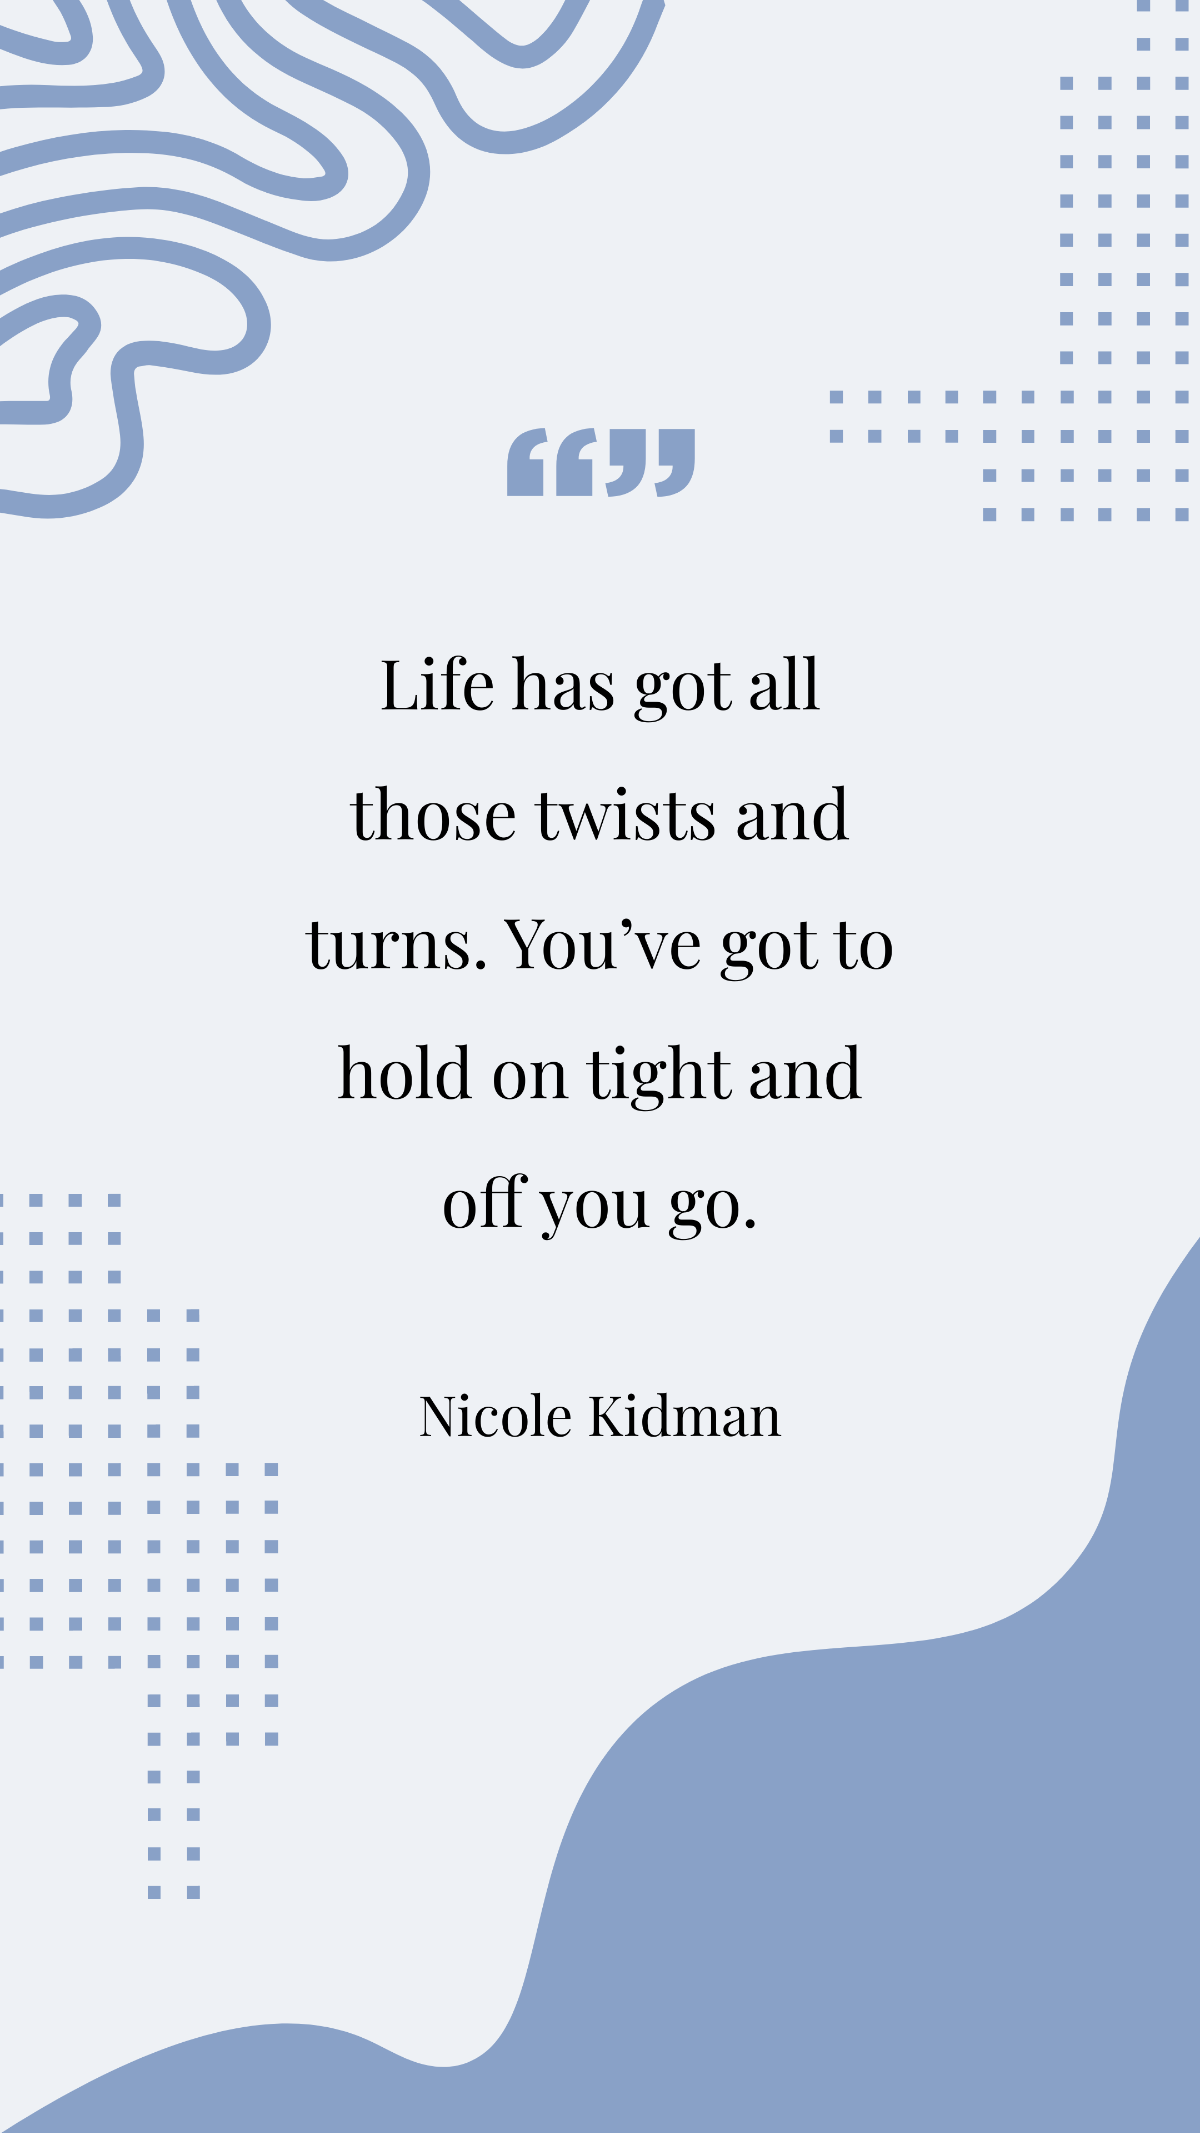 Nicole Kidman - Life has got all those twists and turns. You’ve got to hold on tight and off you go. Template